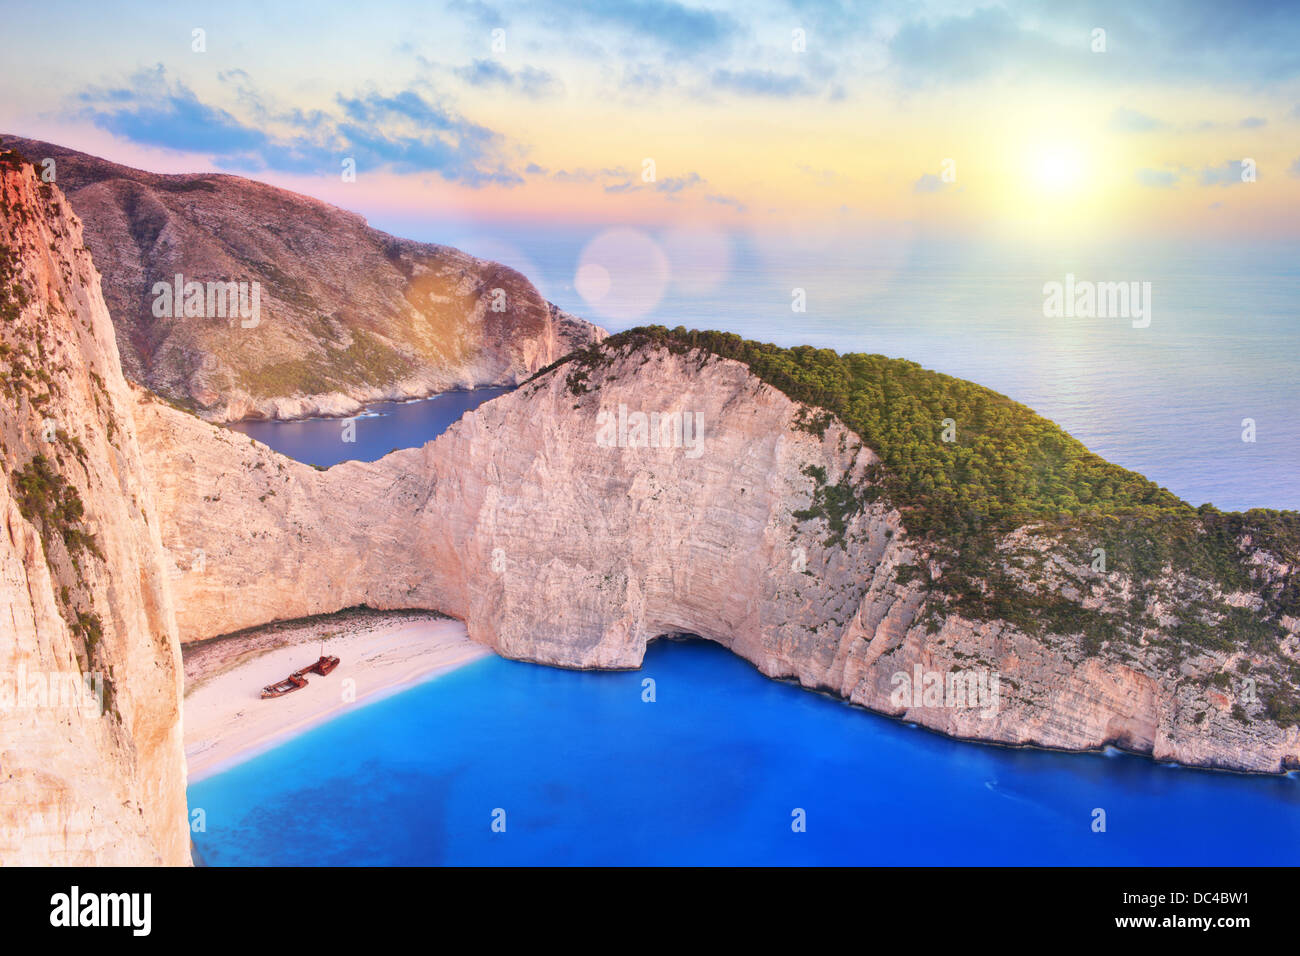 View of Zakynthos island, Greece with a shipwreck on a beach, at sunset Stock Photo